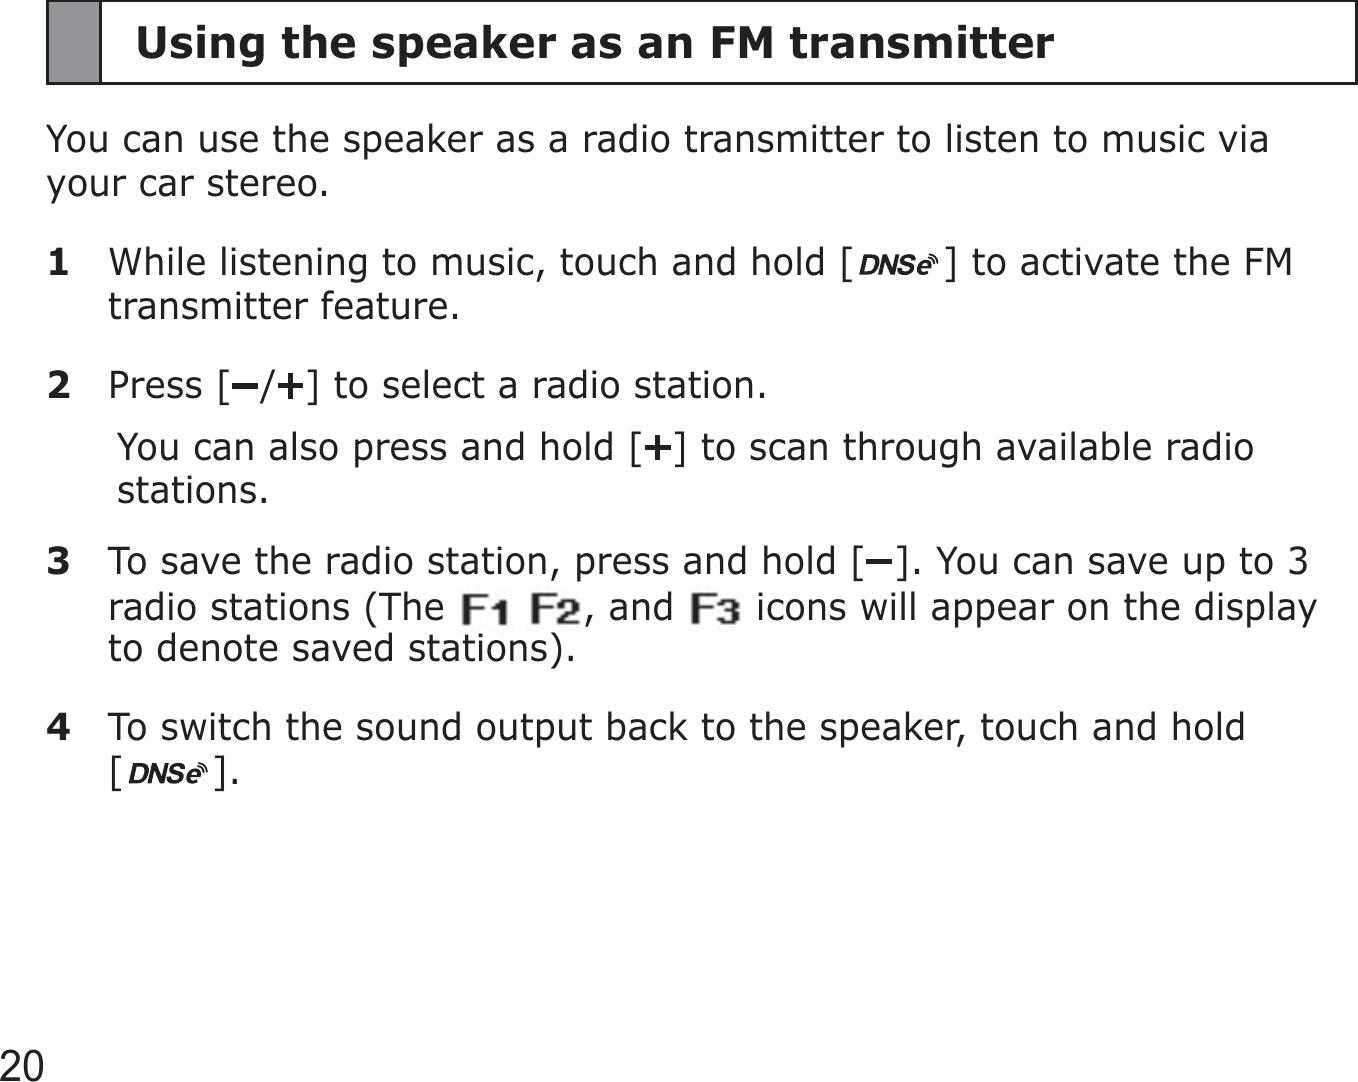 20Using the speaker as an FM transmitterYou can use the speaker as a radio transmitter to listen to music via your car stereo. 1  While listening to music, touch and hold [ ] to activate the FM transmitter feature.2 Press [ / ] to select a radio station.You can also press and hold [ ] to scan through available radio stations.3  To save the radio station, press and hold [ ]. You can save up to 3 radio stations (The    , and   icons will appear on the display to denote saved stations).4  To switch the sound output back to the speaker, touch and hold  [].